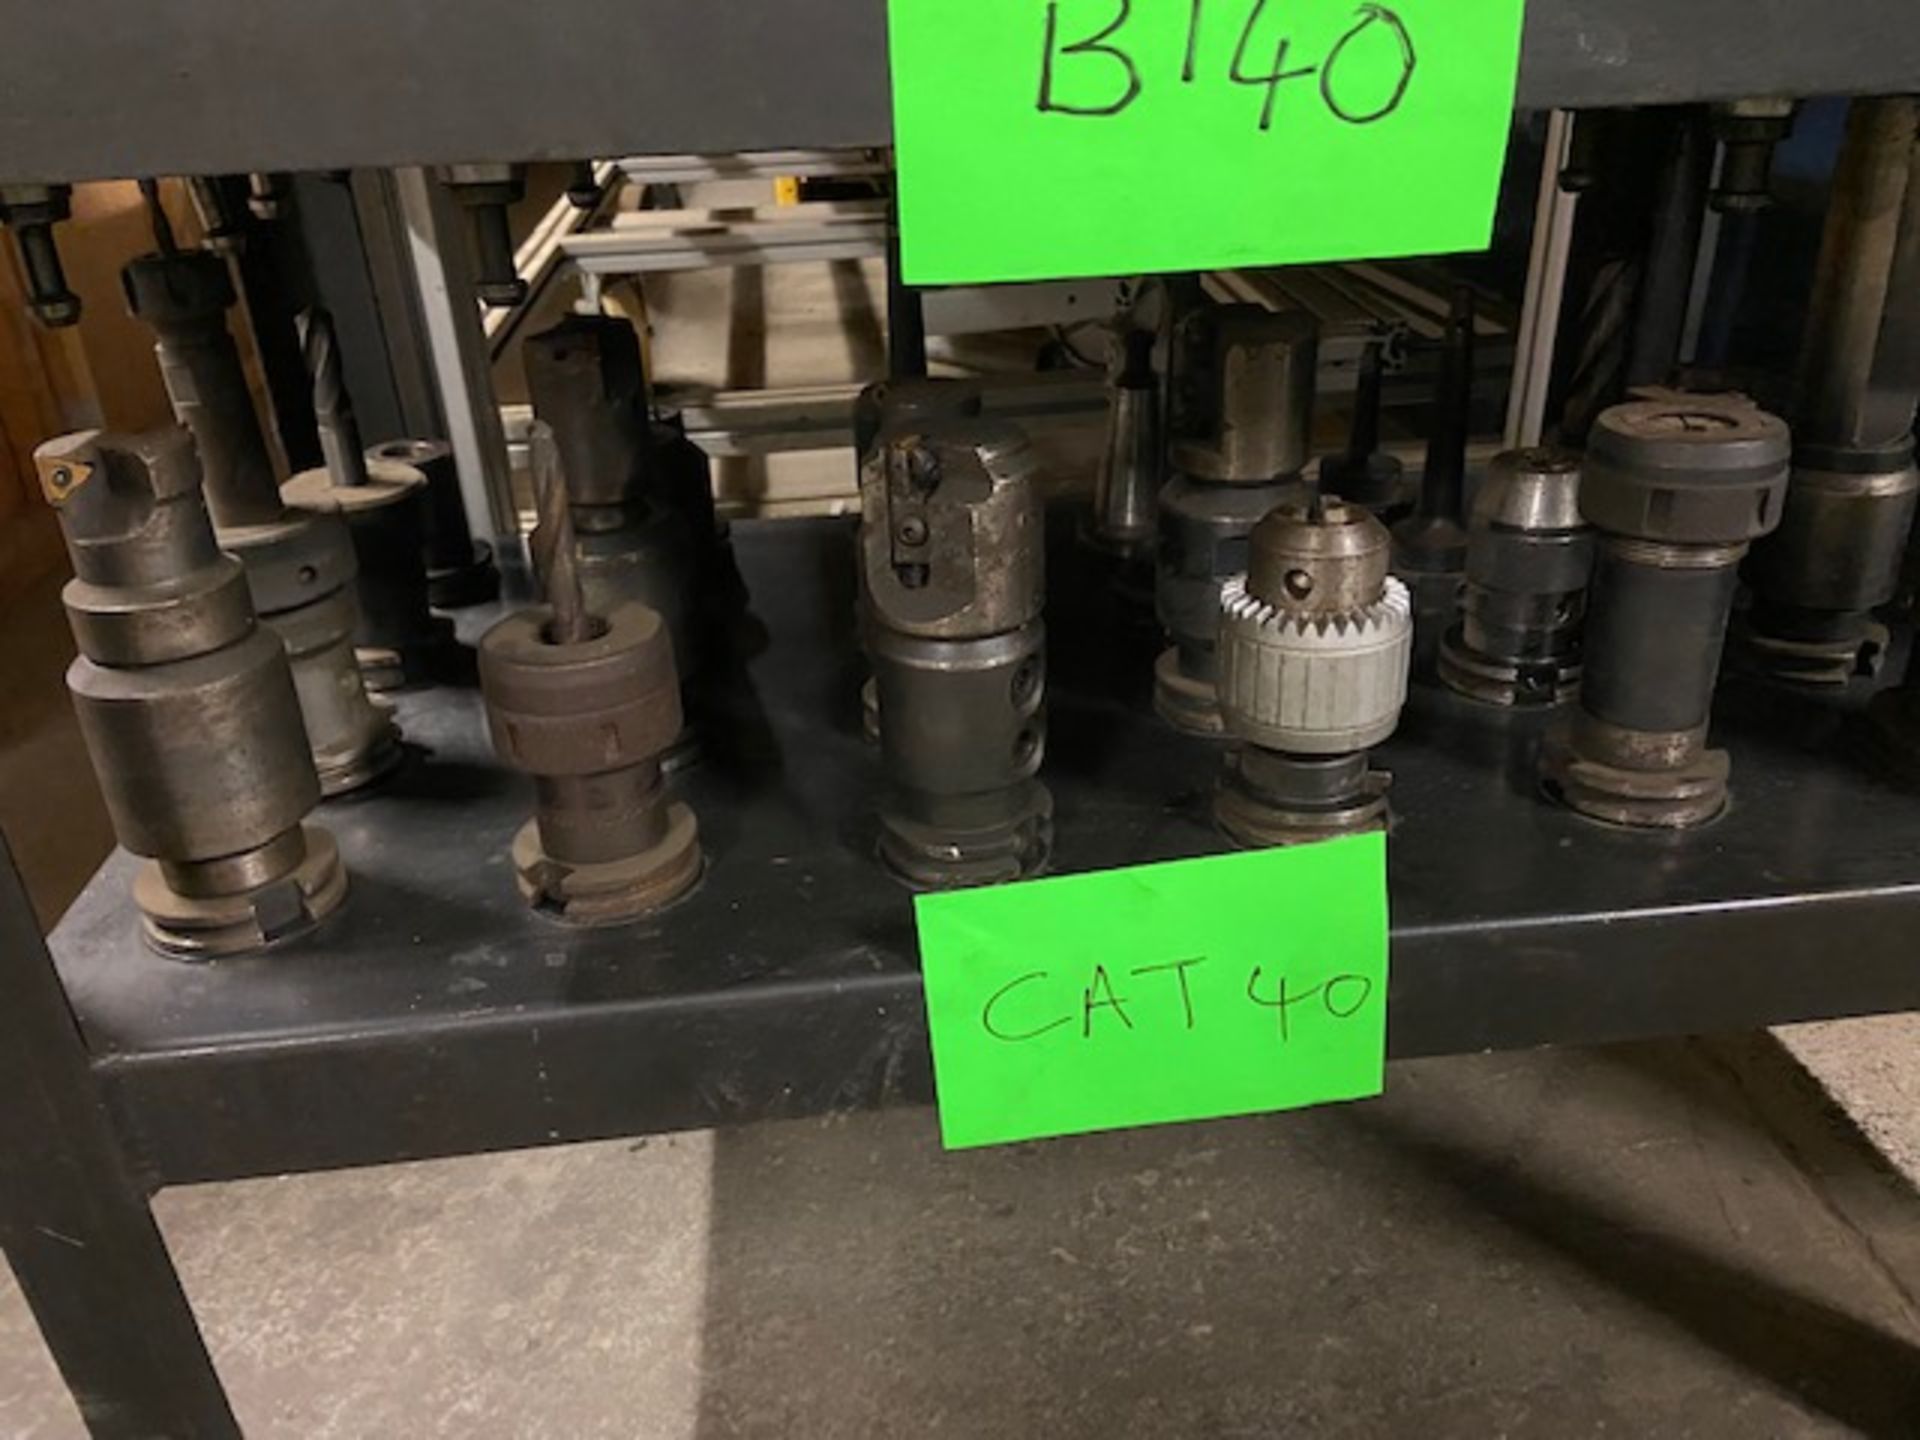 Lot of 96 (96 units) CAT50, BT50, CAT40 and BT40 tooling (24 units of each) - Image 5 of 5